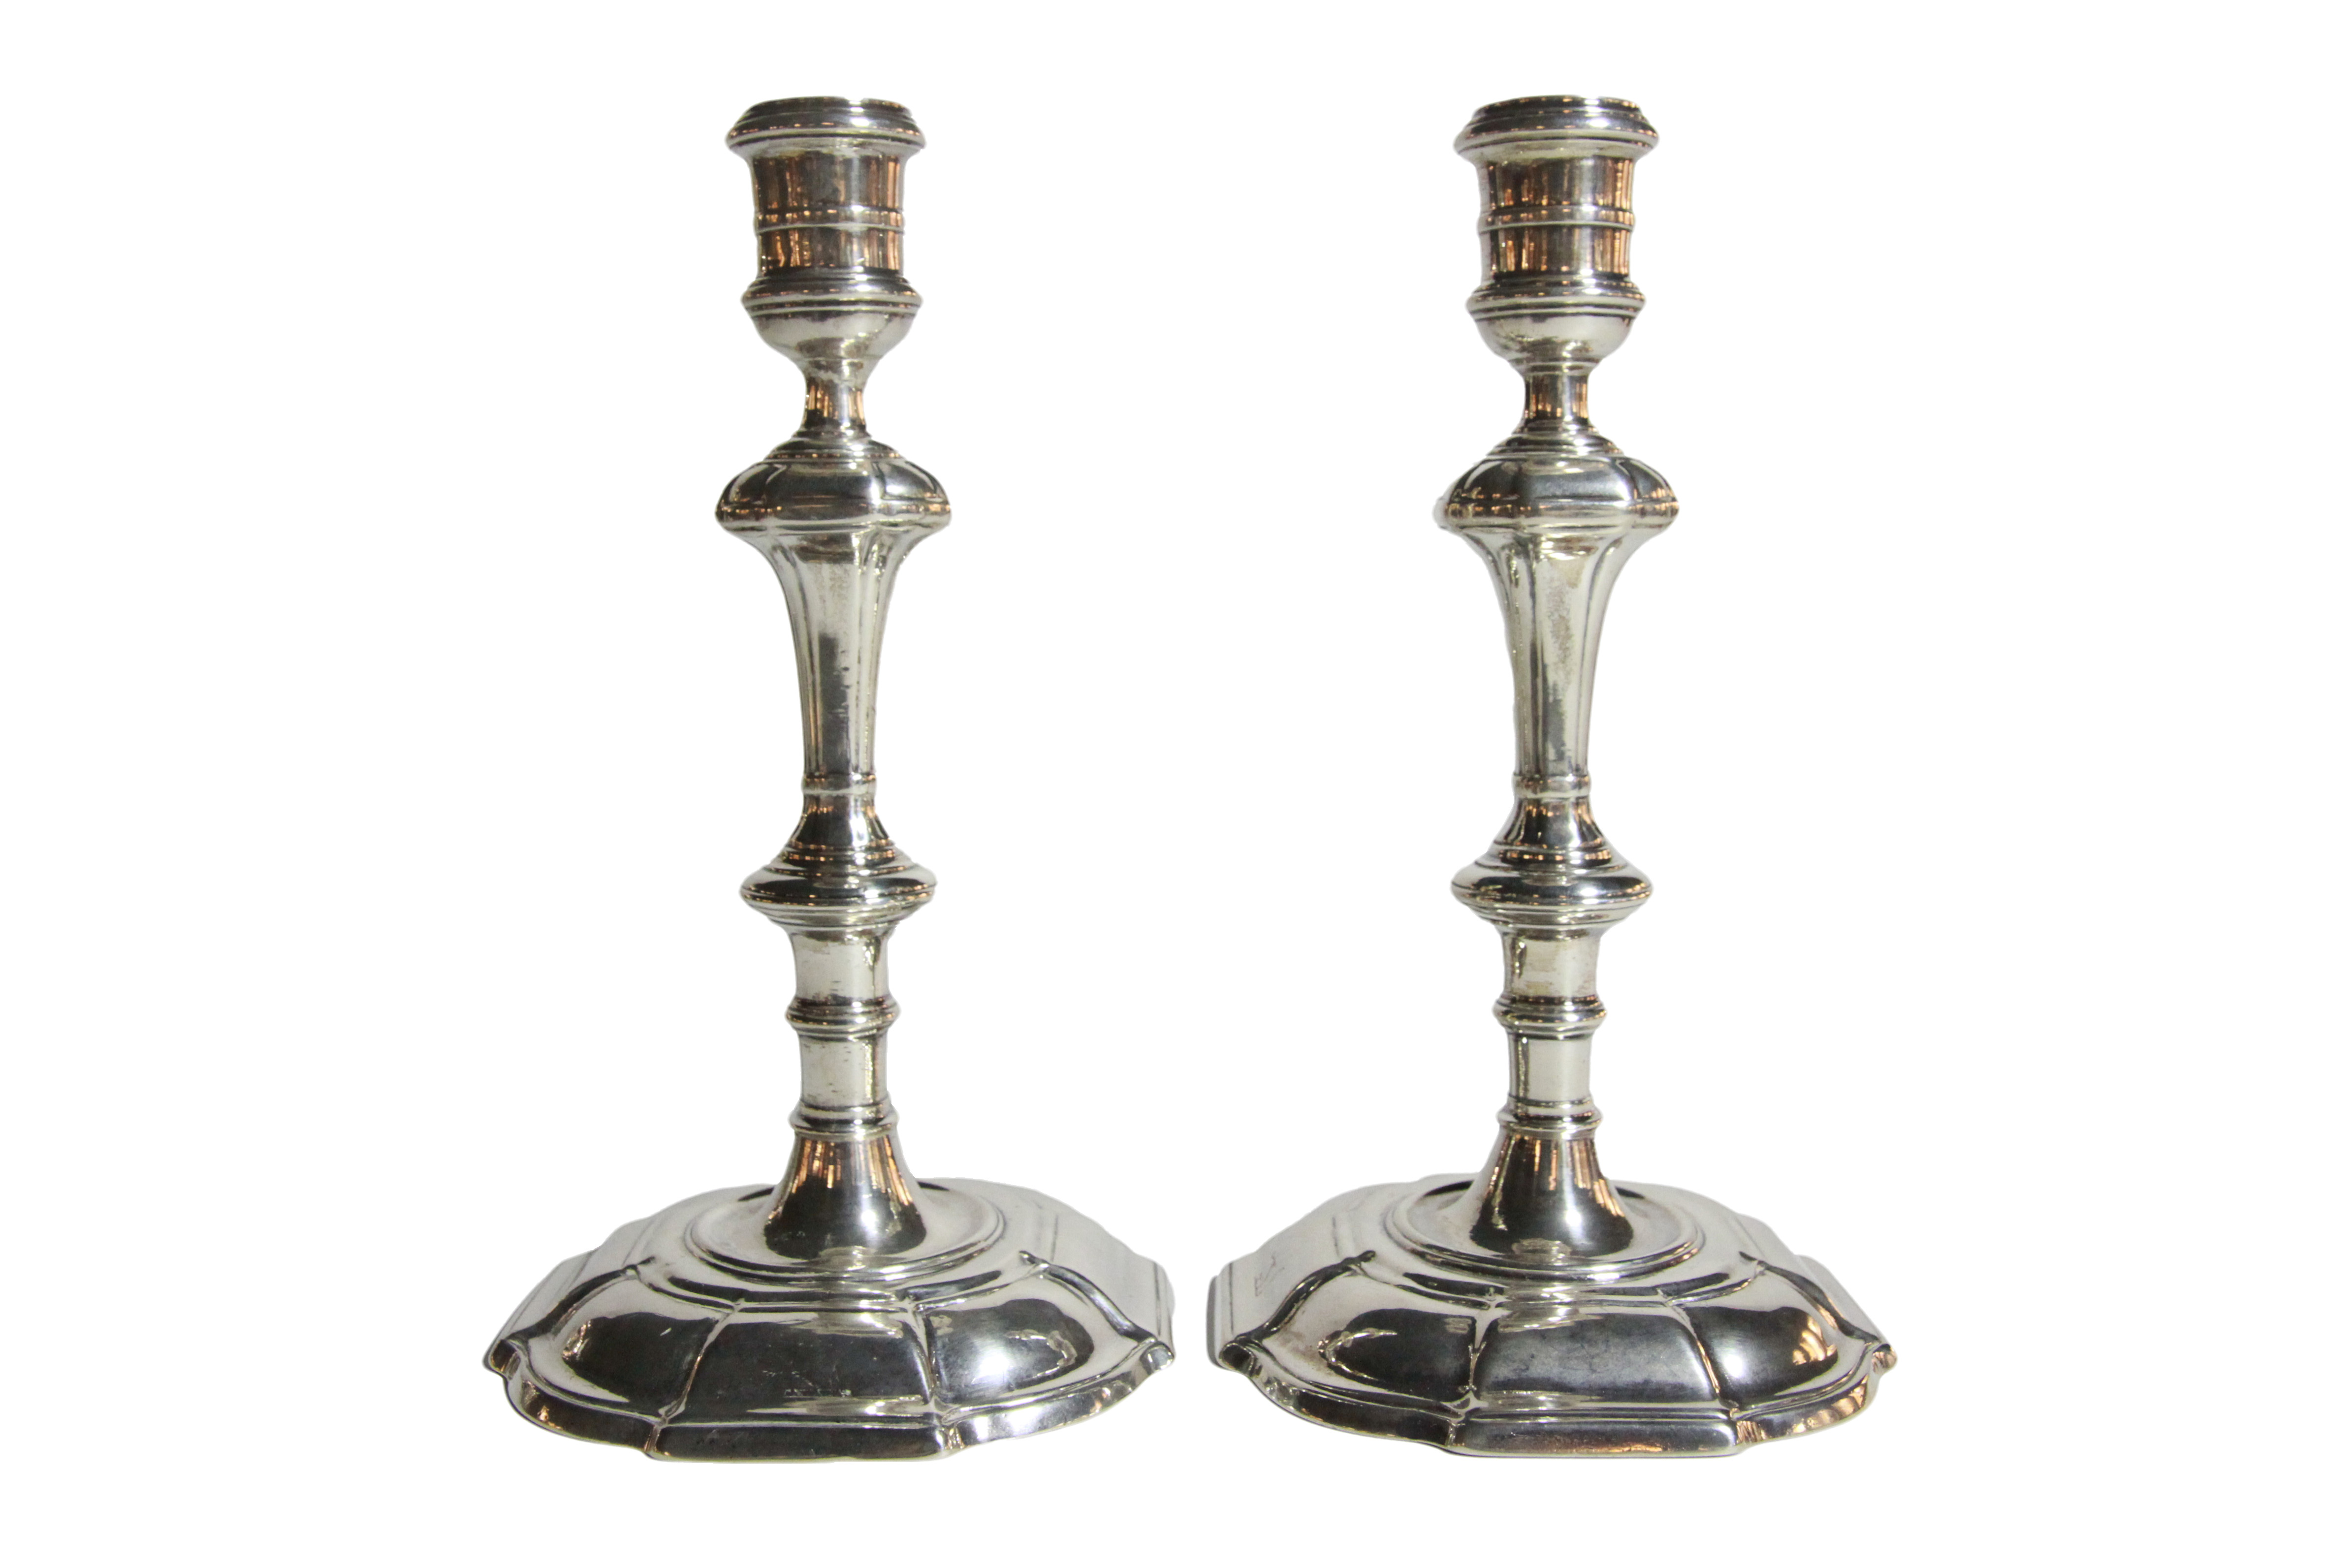 A fine & rare pair of 18th century Guernsey silver George II candlesticks, Henry Guillame